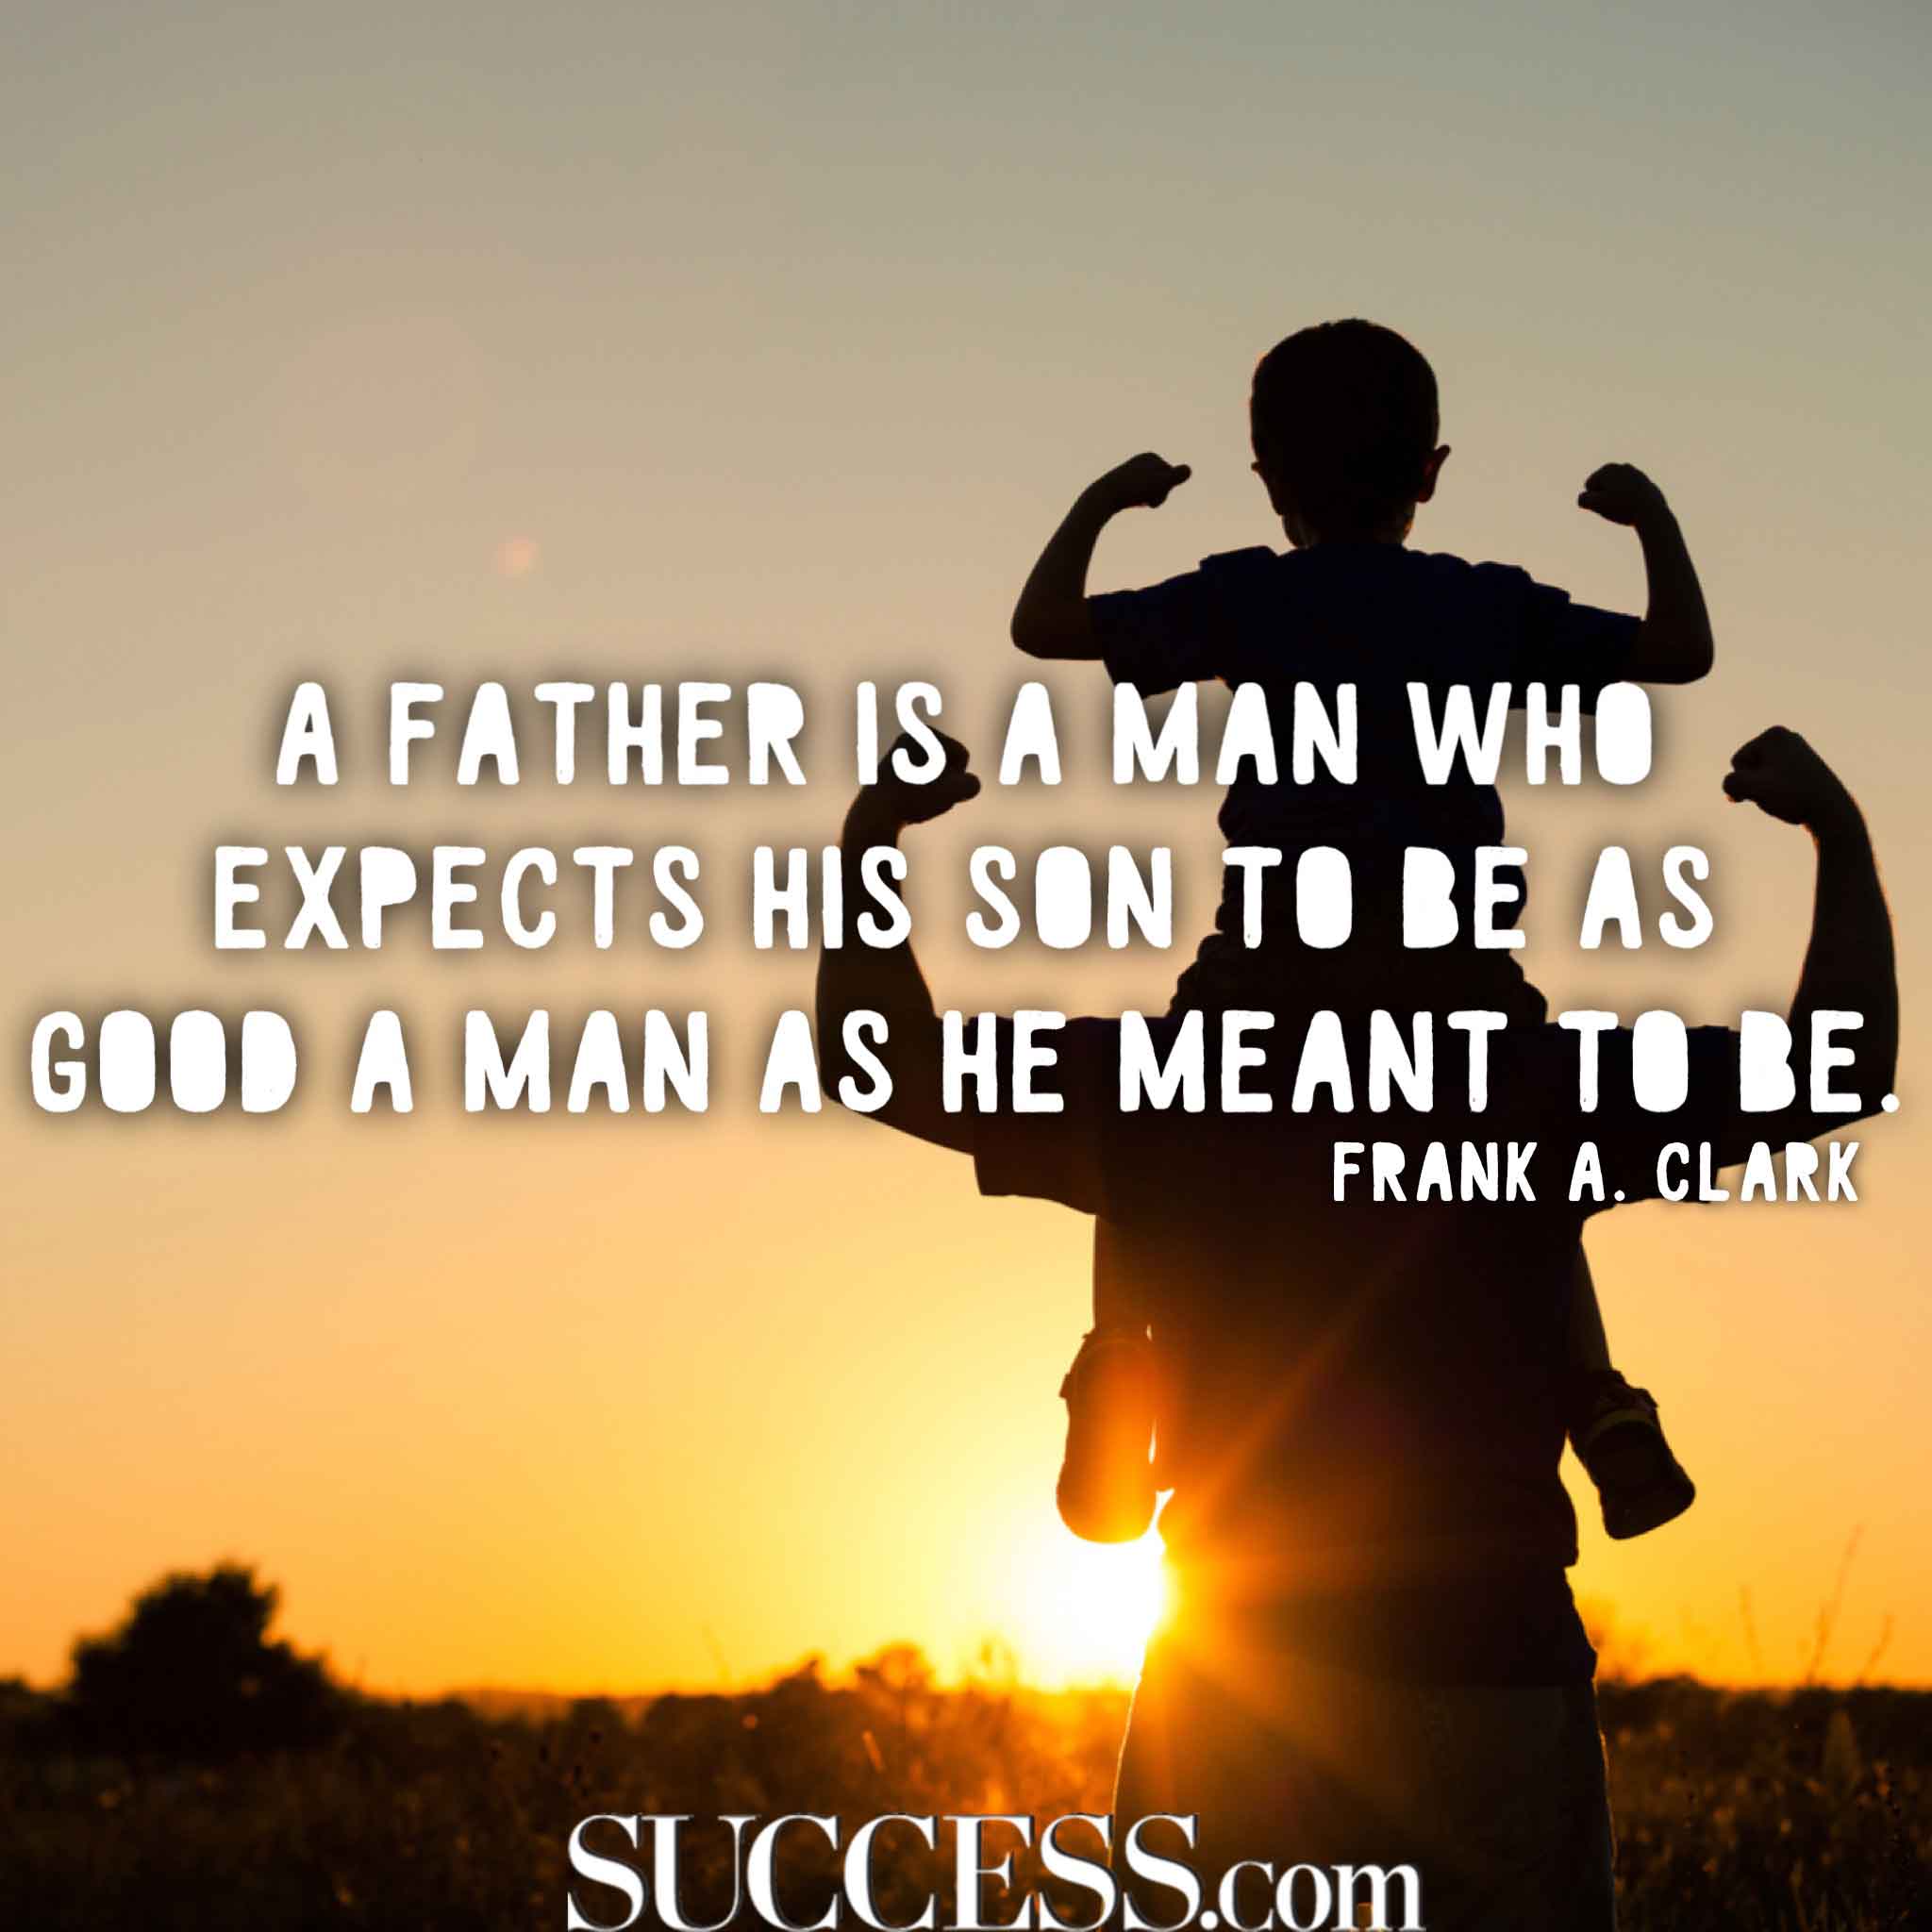 a father is a man who expects his son to be as good a man as he meant to be. frank a clark